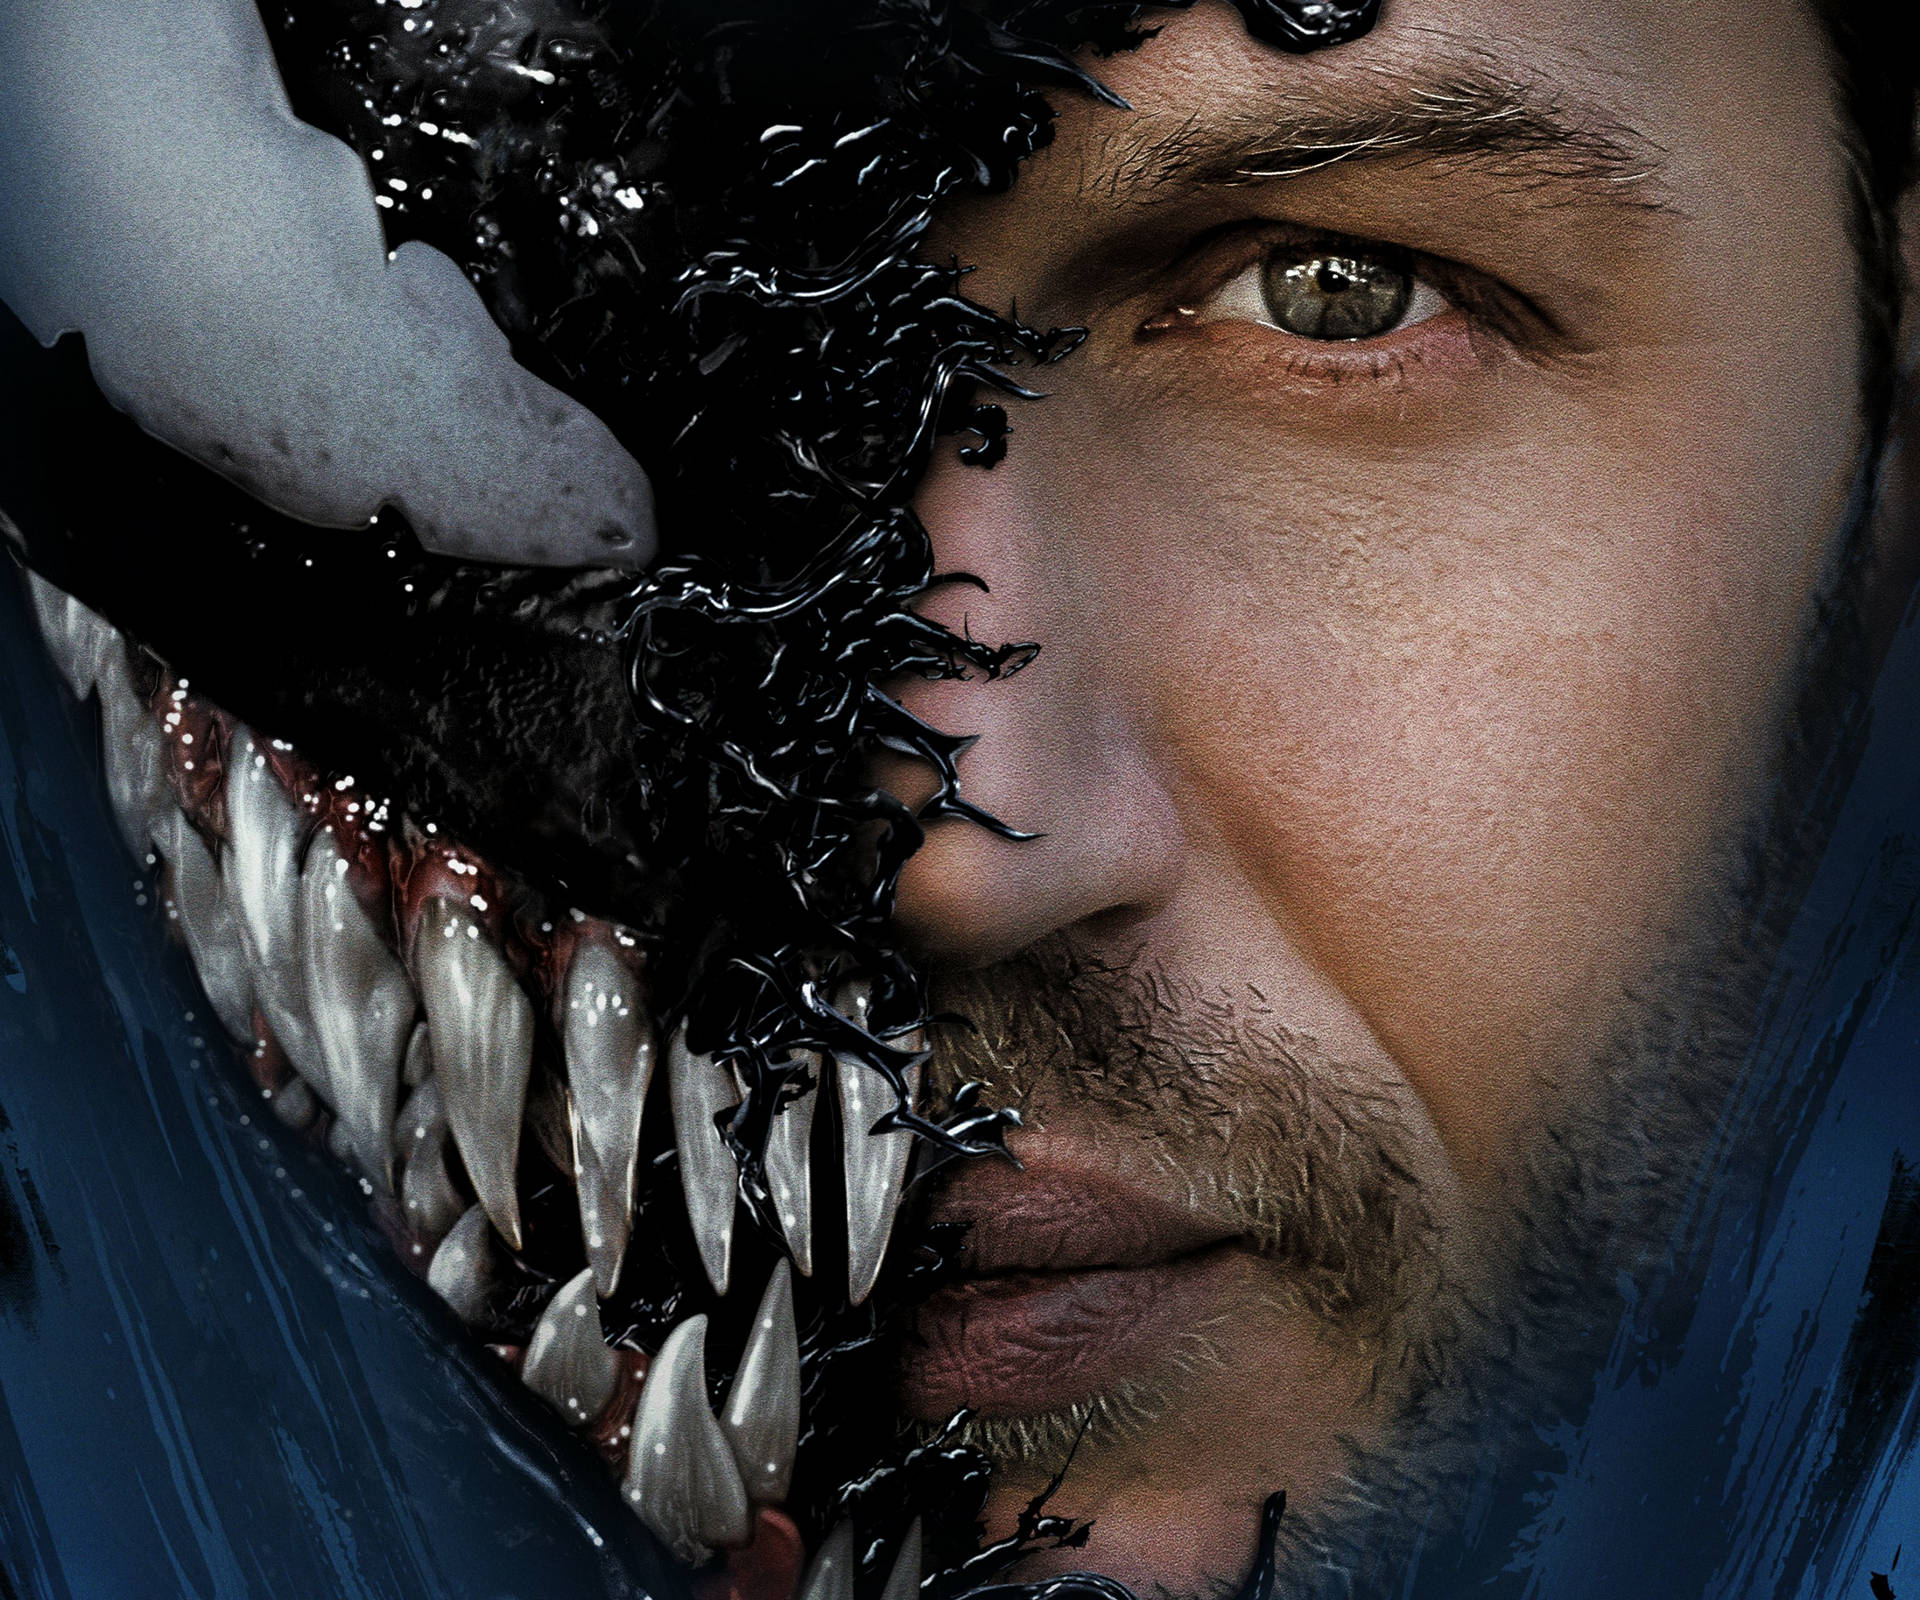 Venom Let There Be Carnage Portrait Wallpaper